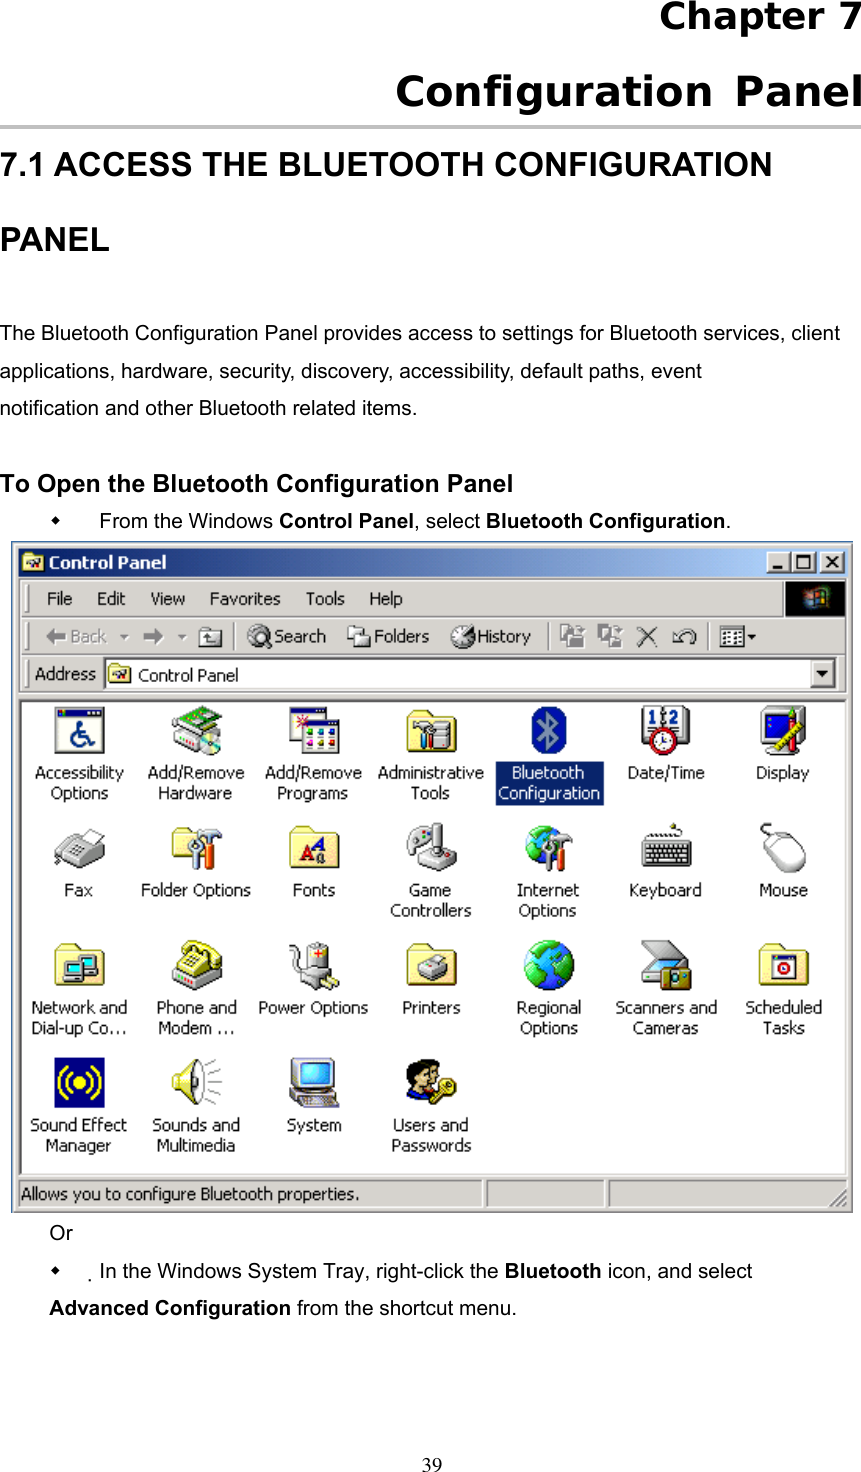 Chapter 7  Configuration Panel 7.1 ACCESS THE BLUETOOTH CONFIGURATION PANEL  The Bluetooth Configuration Panel provides access to settings for Bluetooth services, client applications, hardware, security, discovery, accessibility, default paths, event notification and other Bluetooth related items.  To Open the Bluetooth Configuration Panel   From the Windows Control Panel, select Bluetooth Configuration.  Or   In the Windows System Tray, right-click the Bluetooth icon, and select Advanced Configuration from the shortcut menu.  39 